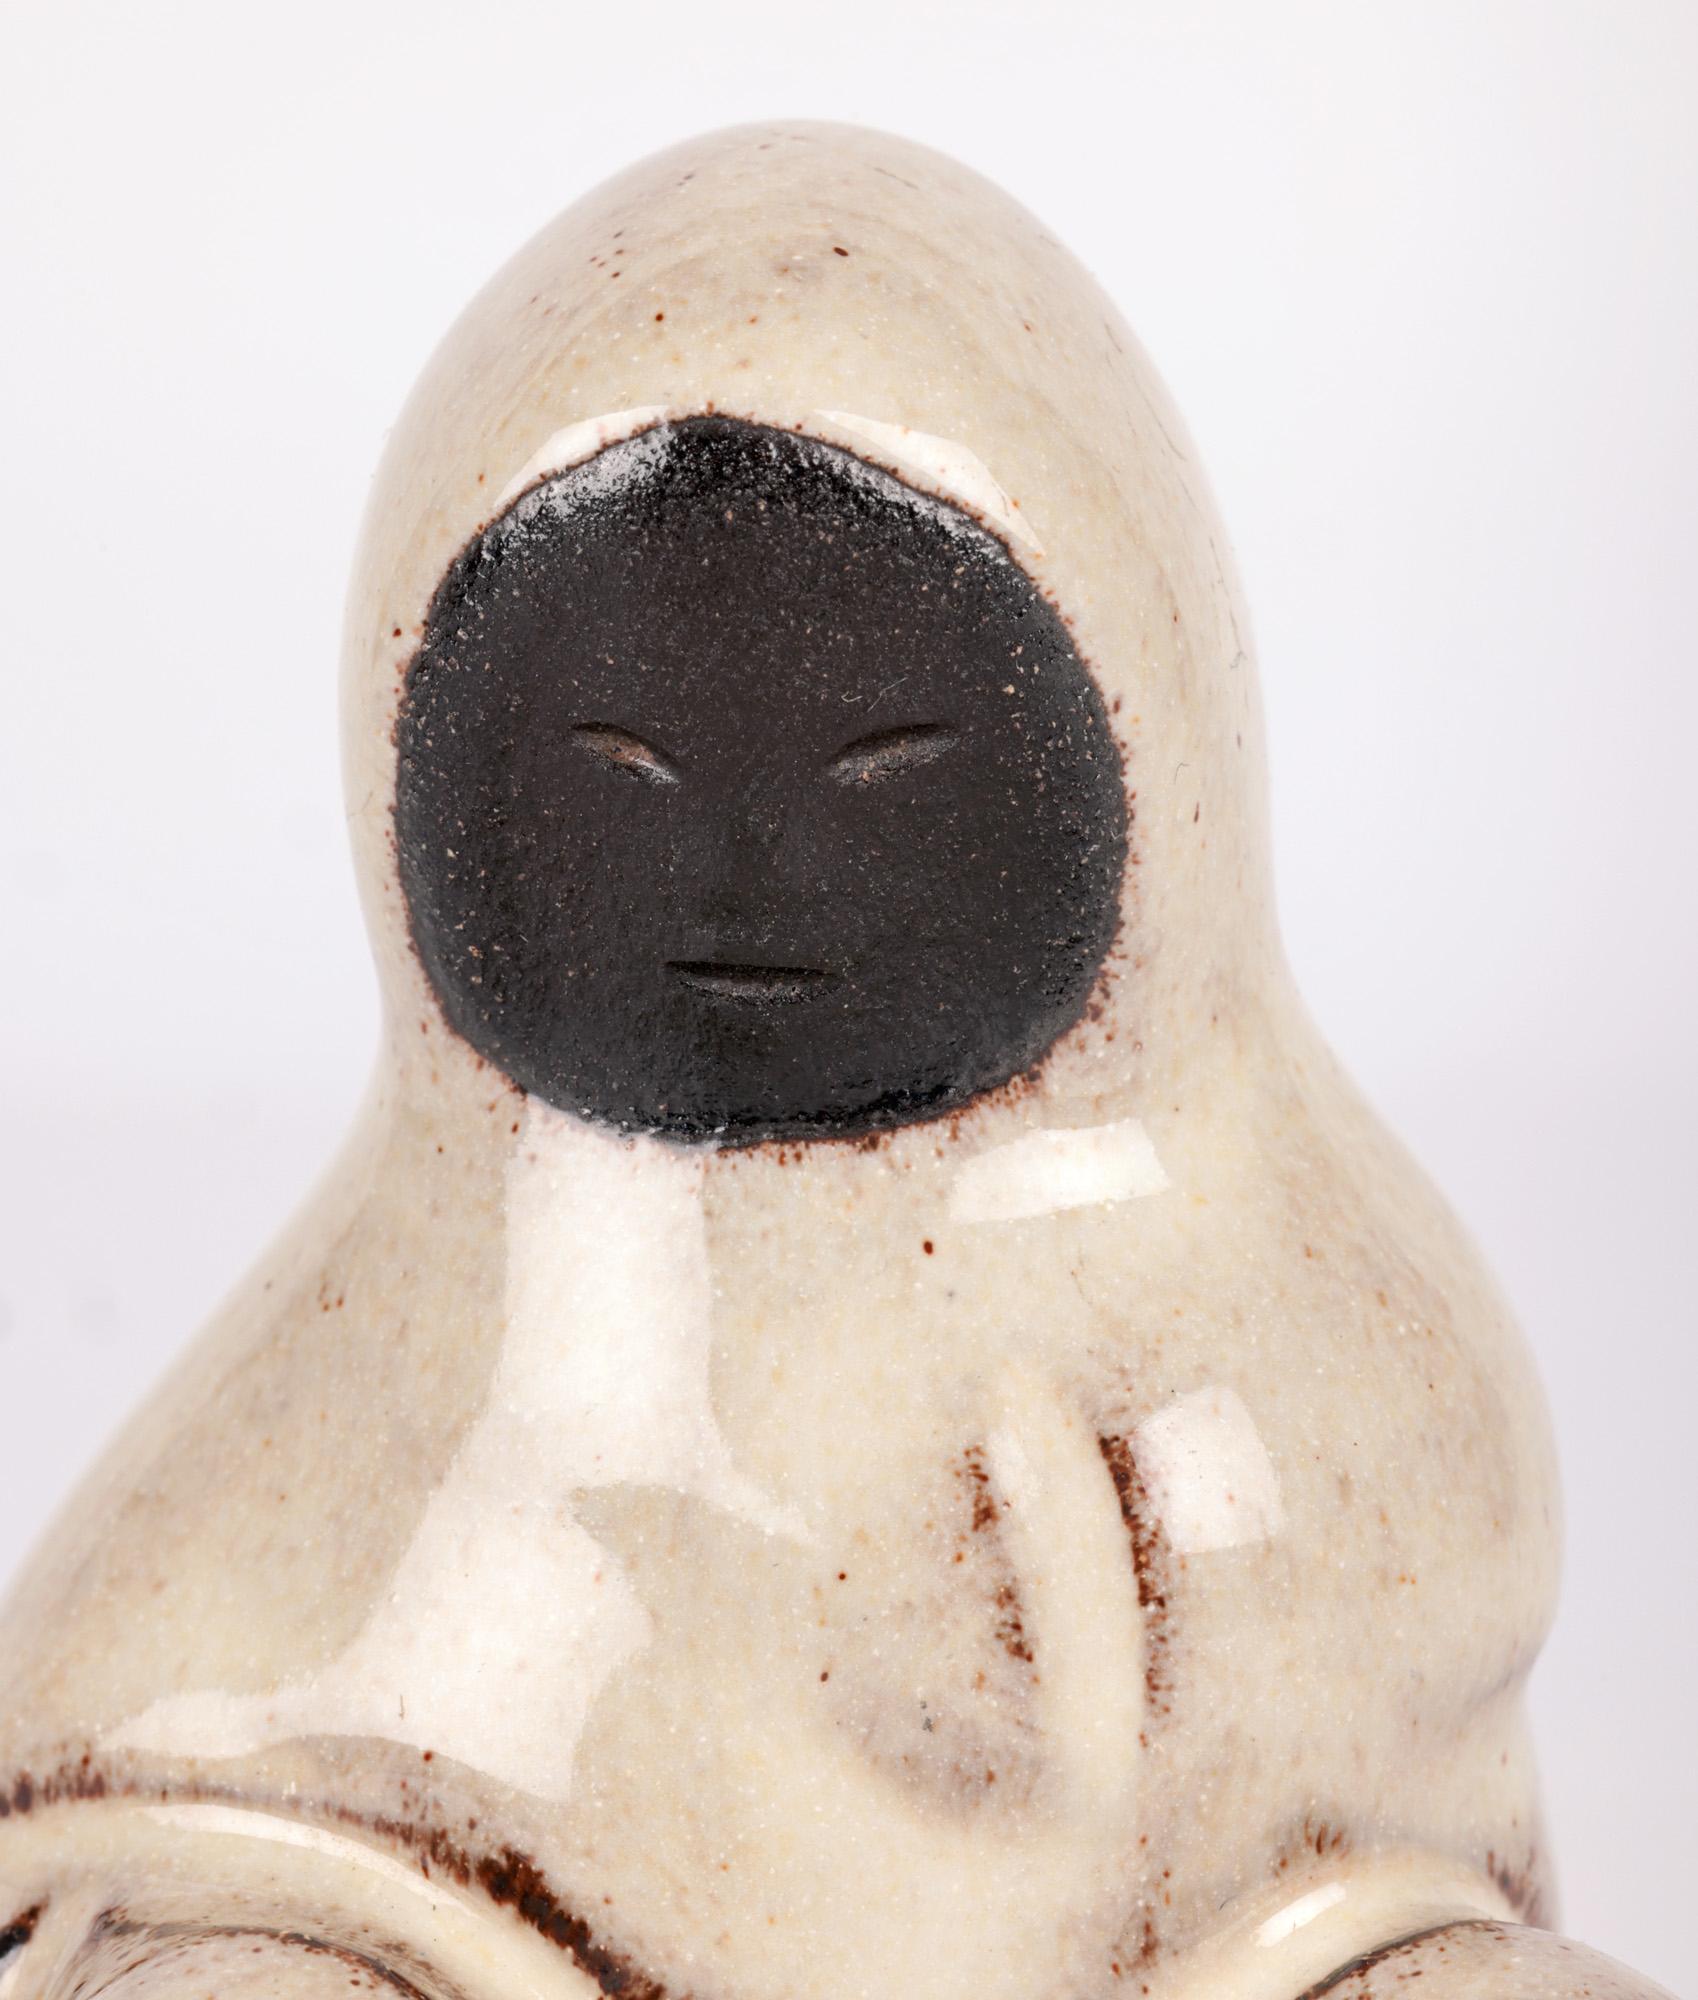 A charming and uncommon Danish mid-century art pottery eskimo figure made by Hyllested Keramik and dating from around 1960. This highly collectable figure is referenced by some as representing a Greenland eskimo and others as Inuit and the black